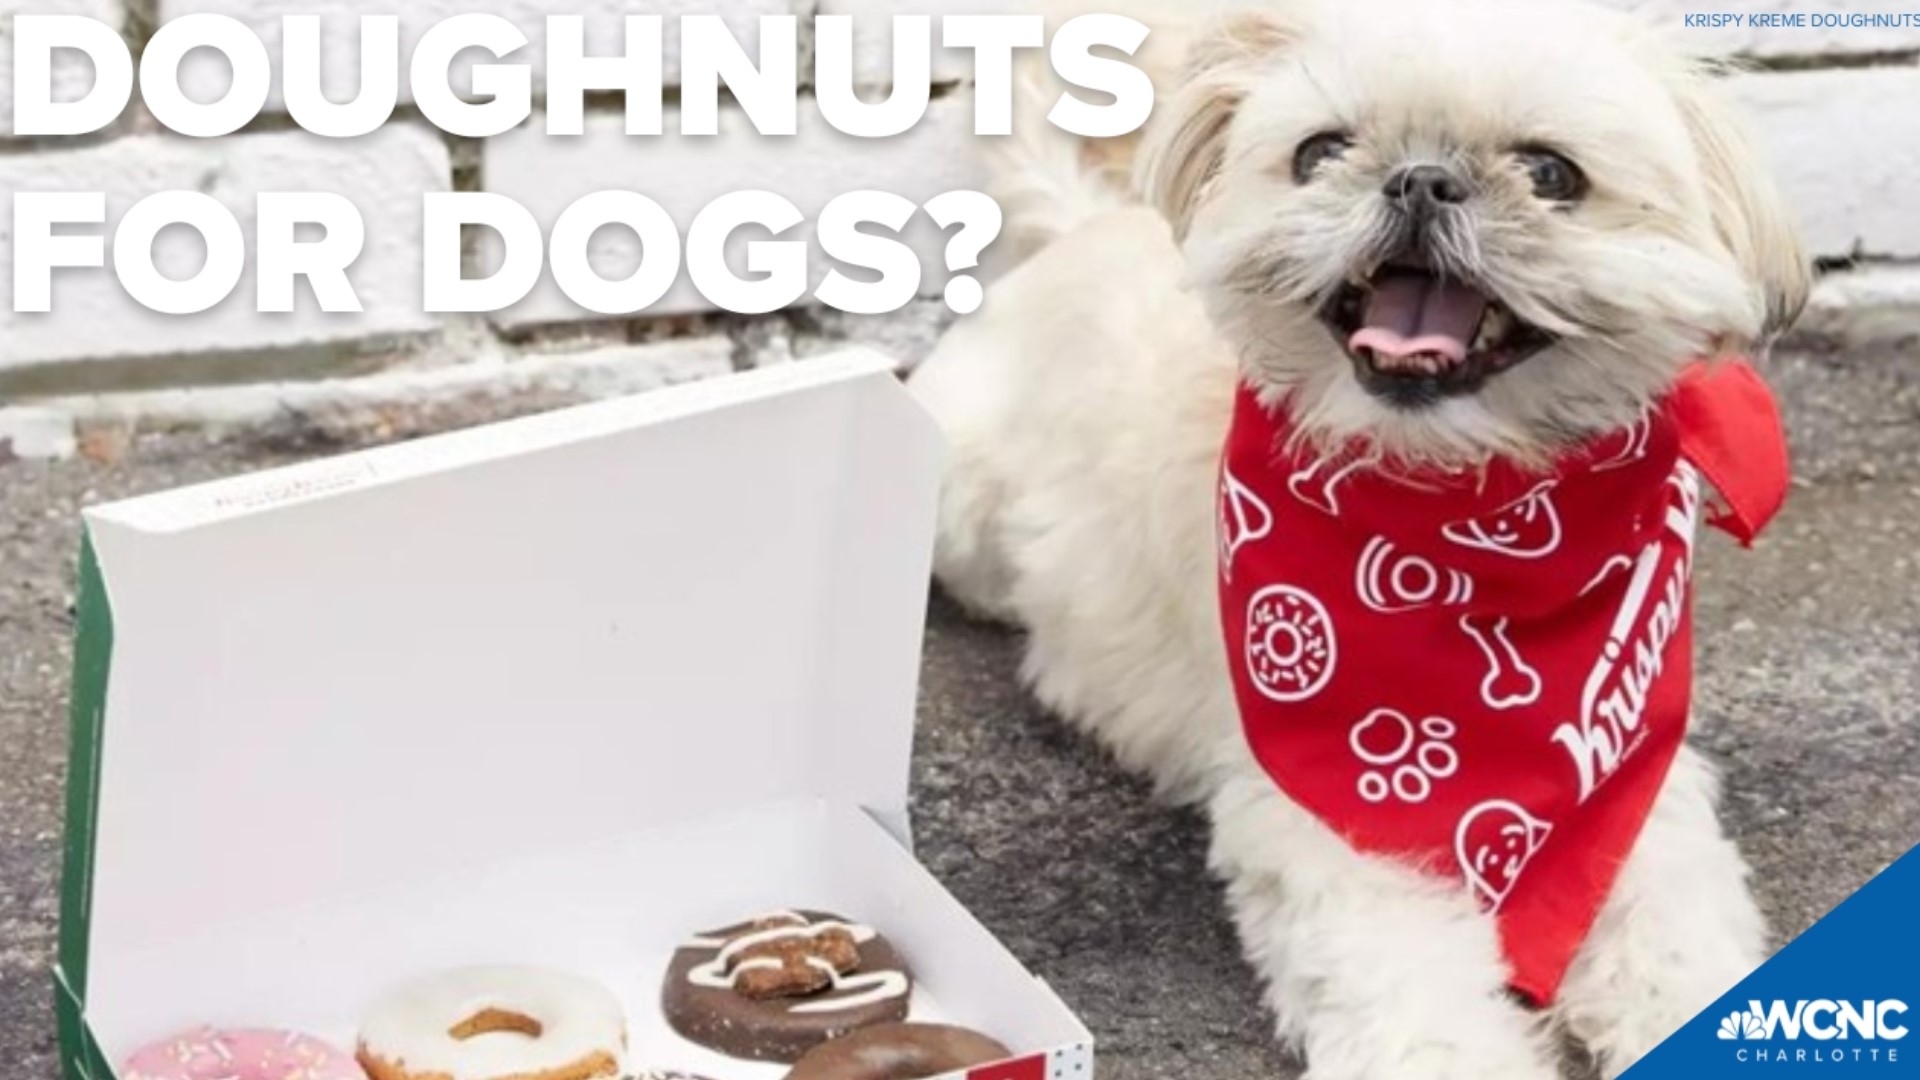 Krispy Kreme is releasing a special line of doughnuts for dogs.